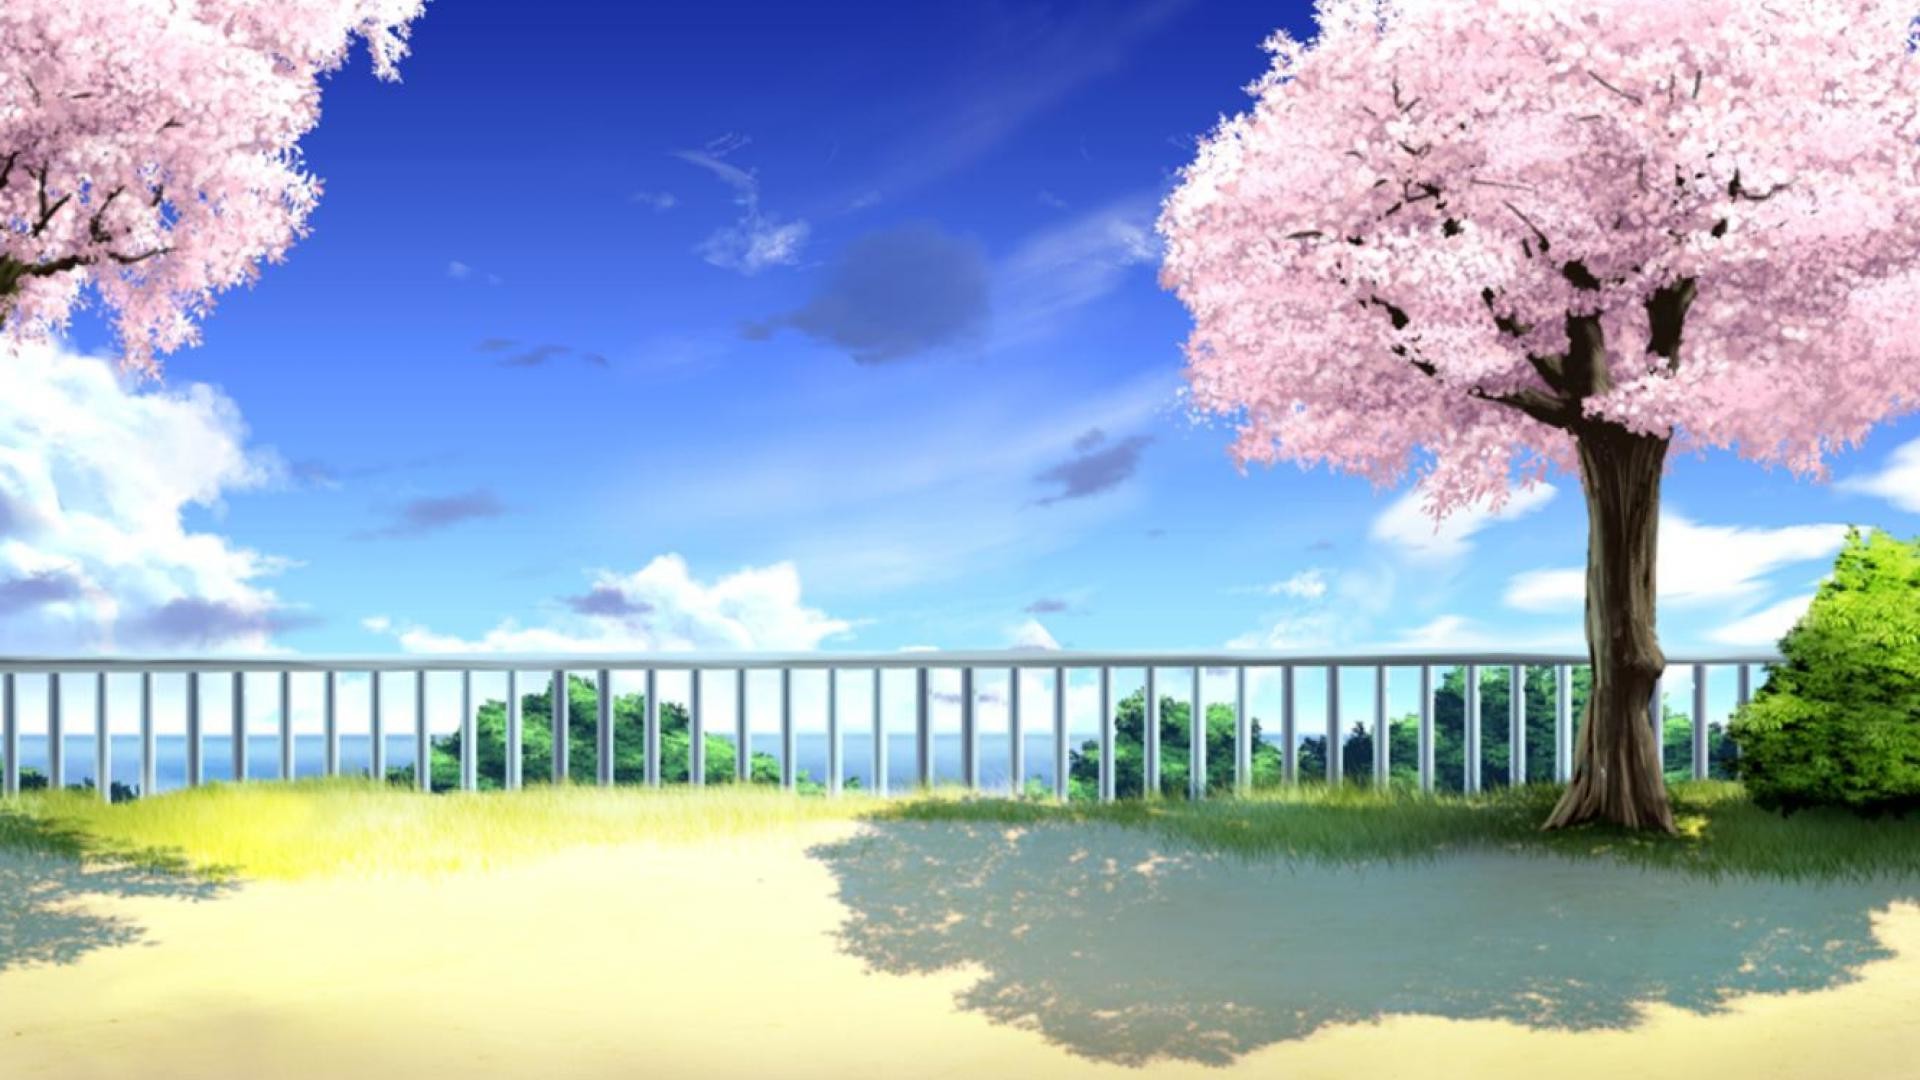 17+ Incredible Cherry Blossom Wallpaper Anime Hd Images - Anime Wallpapers